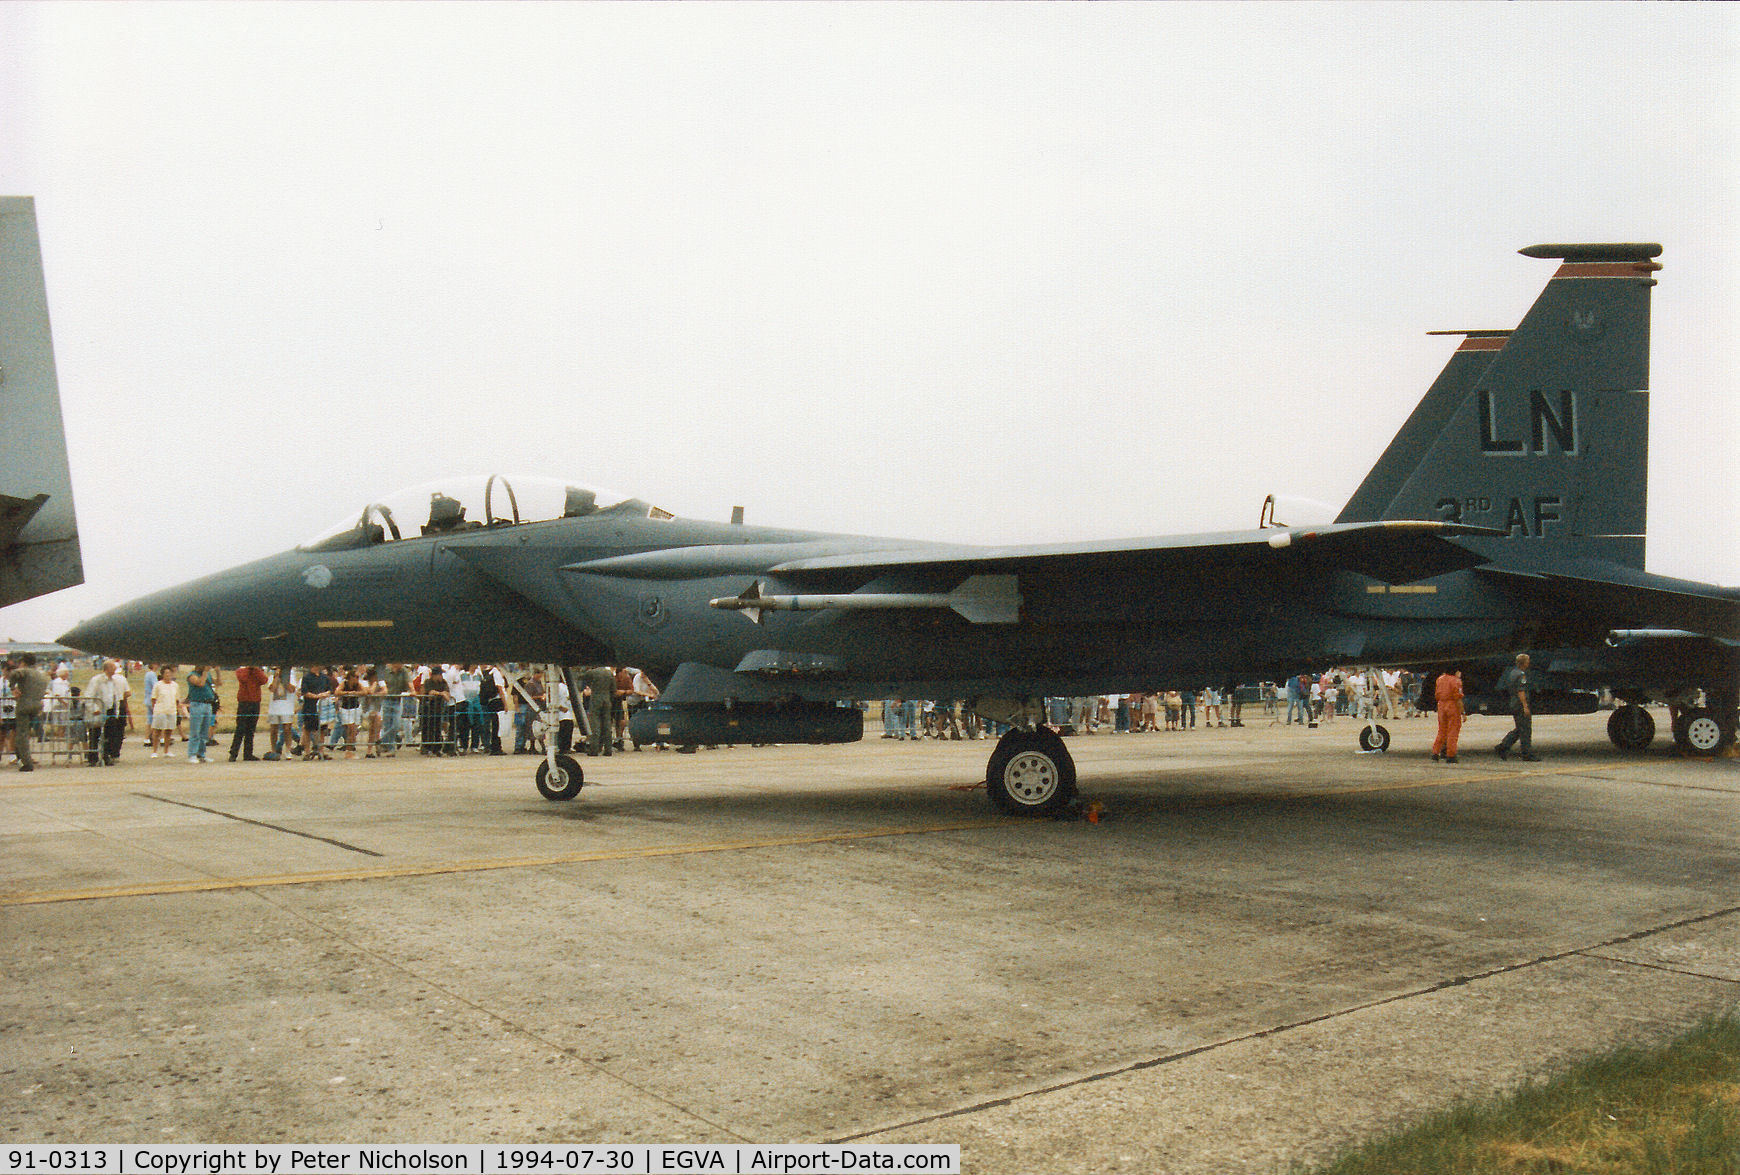 91-0313, 1991 McDonnell Douglas F-15E Strike Eagle C/N 1220/E178, F-15E Strike Eagle, callsign Snake 12, of RAF Lakenheath's 494th Fighter Squadron/48th Fighter Wing on display at the 1994 Intnl Air Tattoo at RAF Fairford.